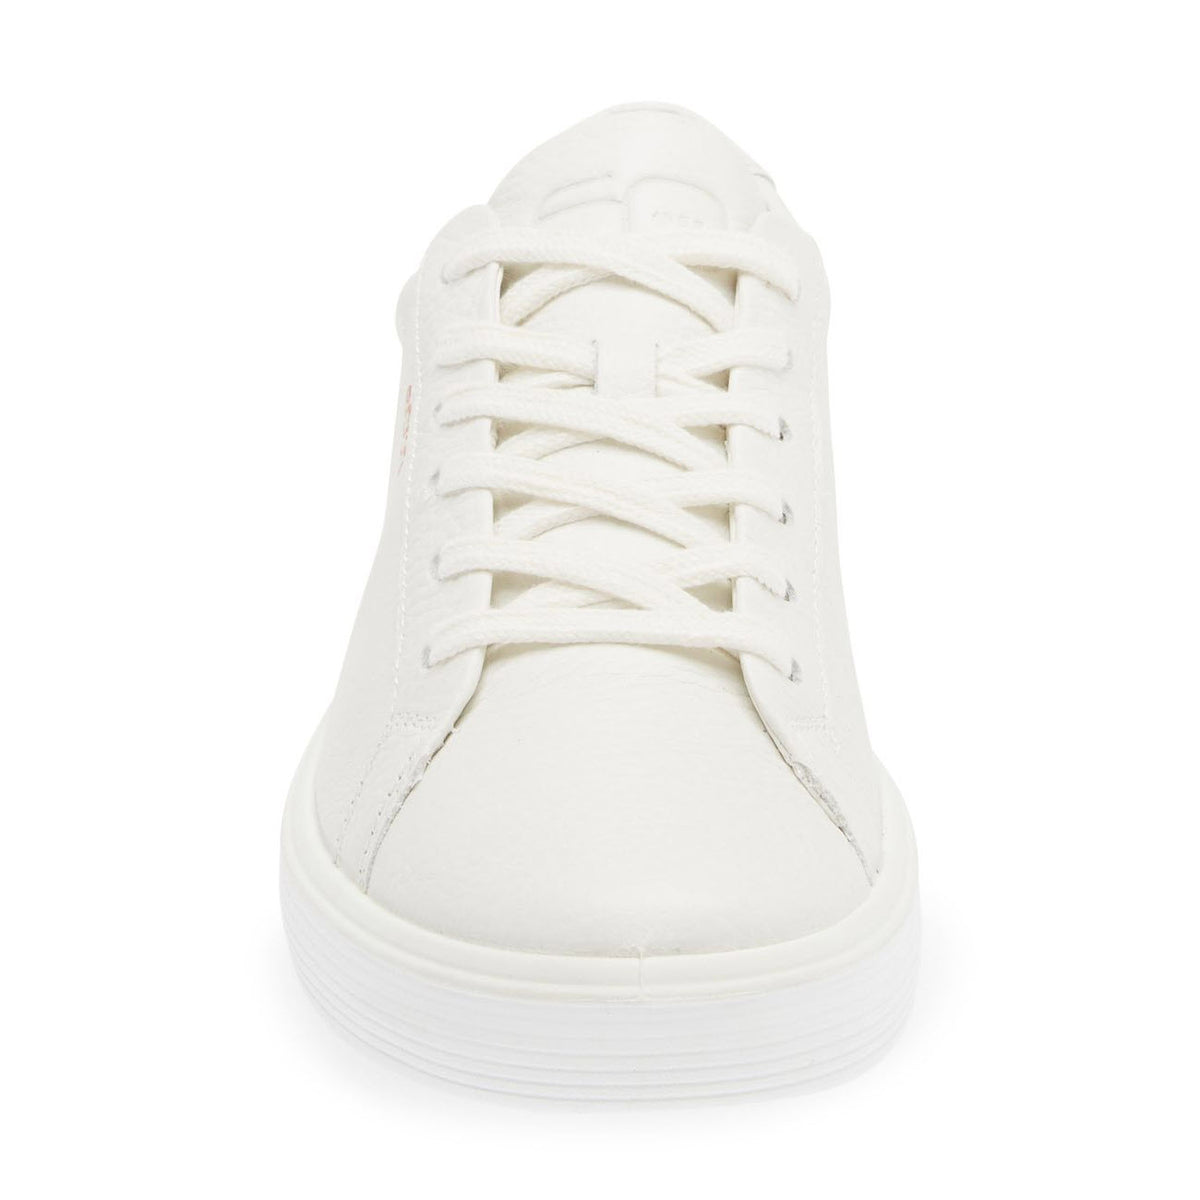 Front view of a Ecco white lace-up sneaker with a padded footbed on a white background.